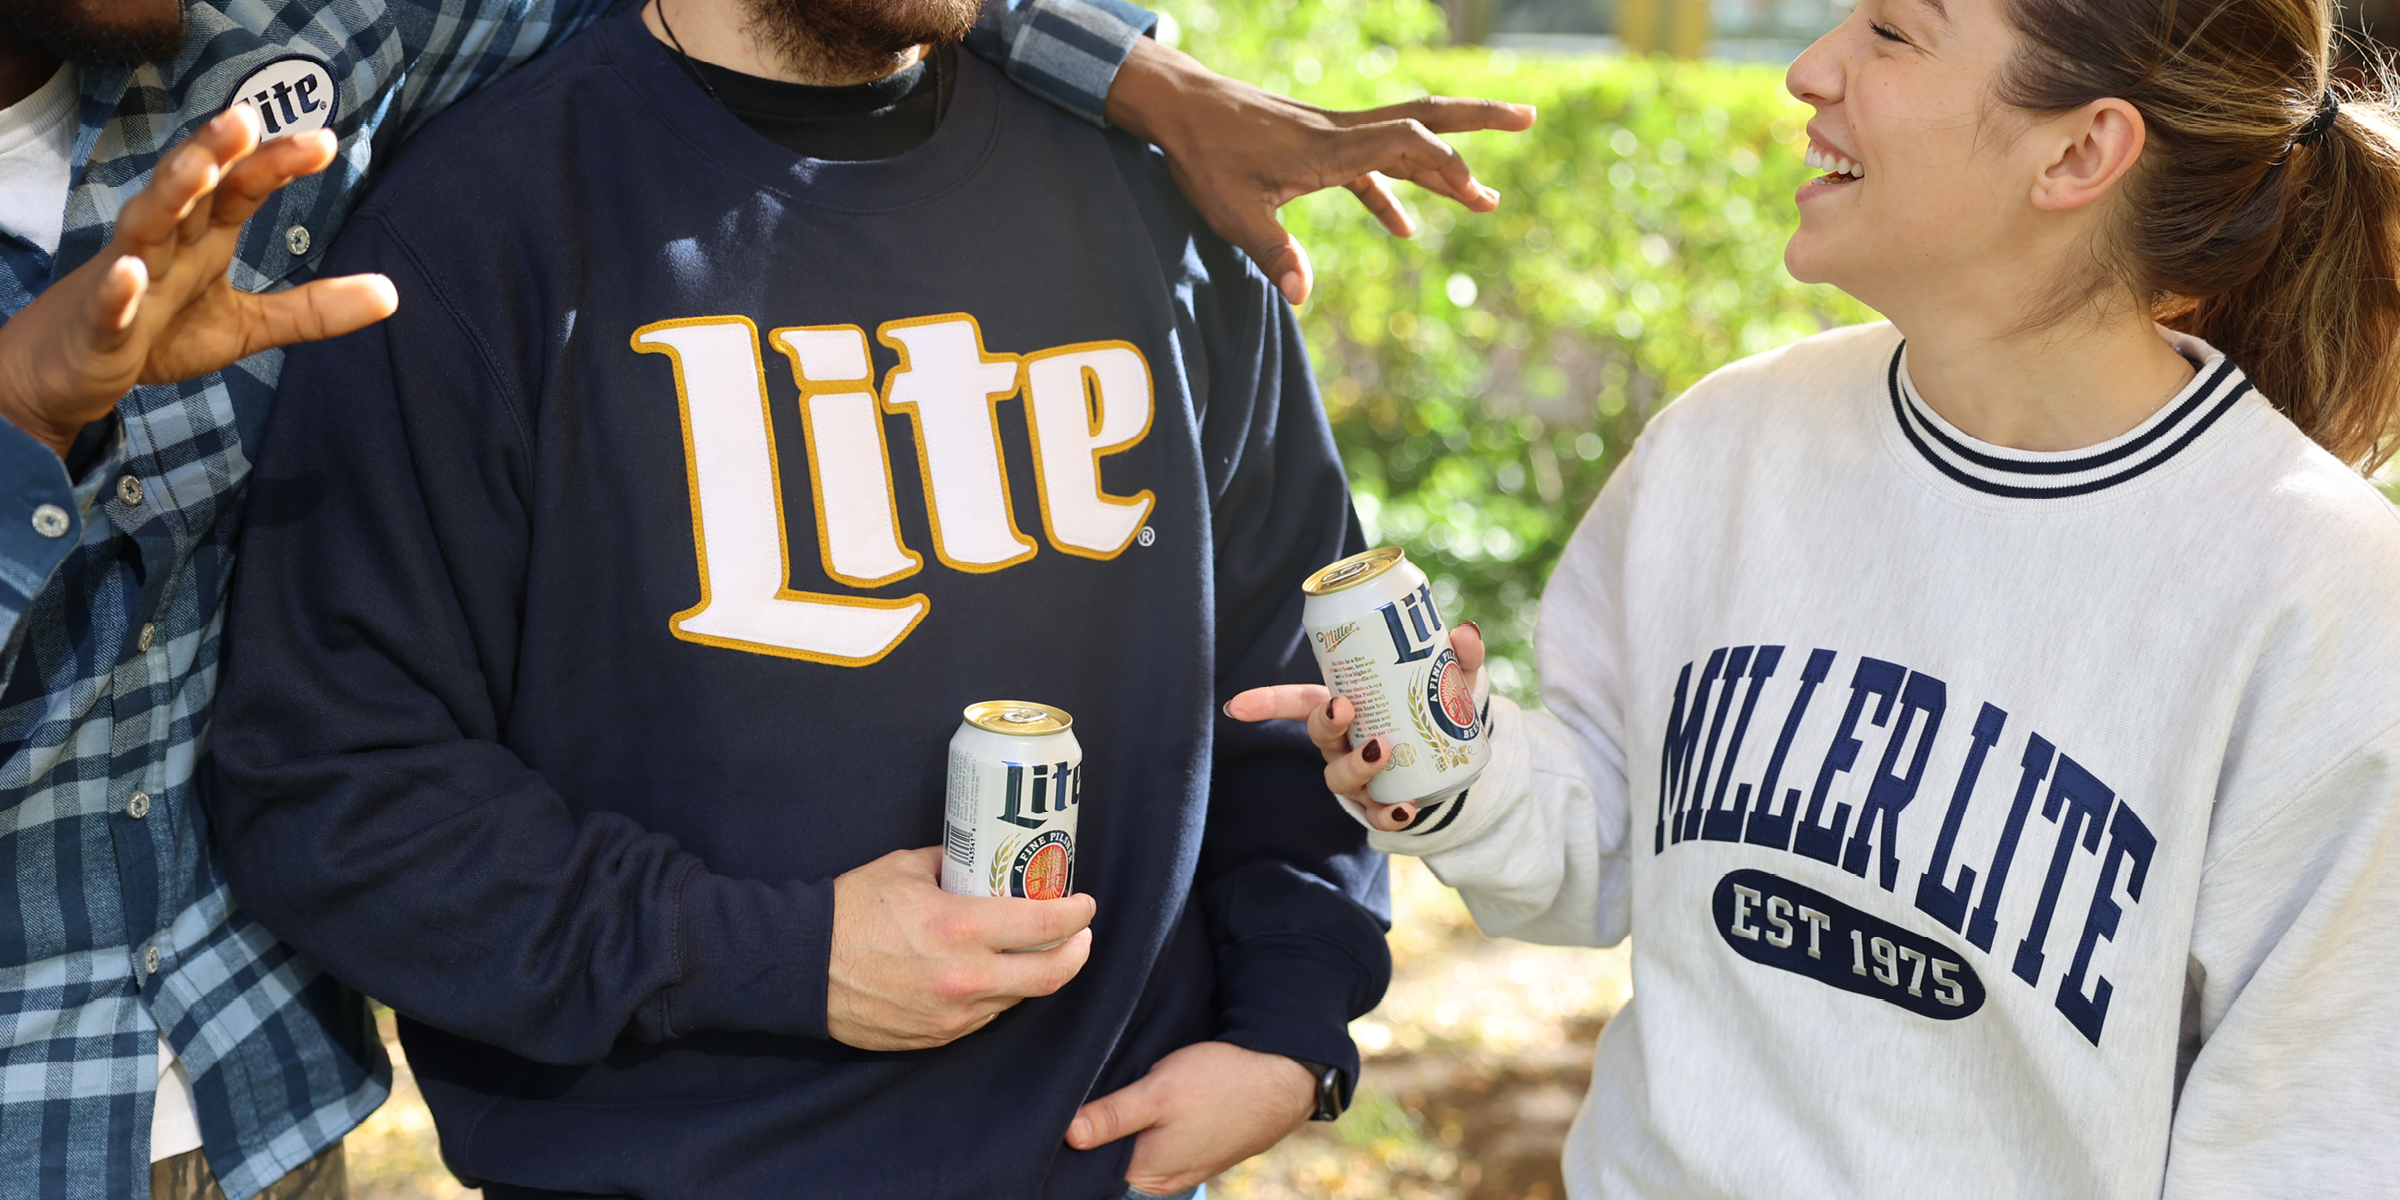 Miller Lite Sells 'Beer Cube' Tray for Cooling Down Warm Beer